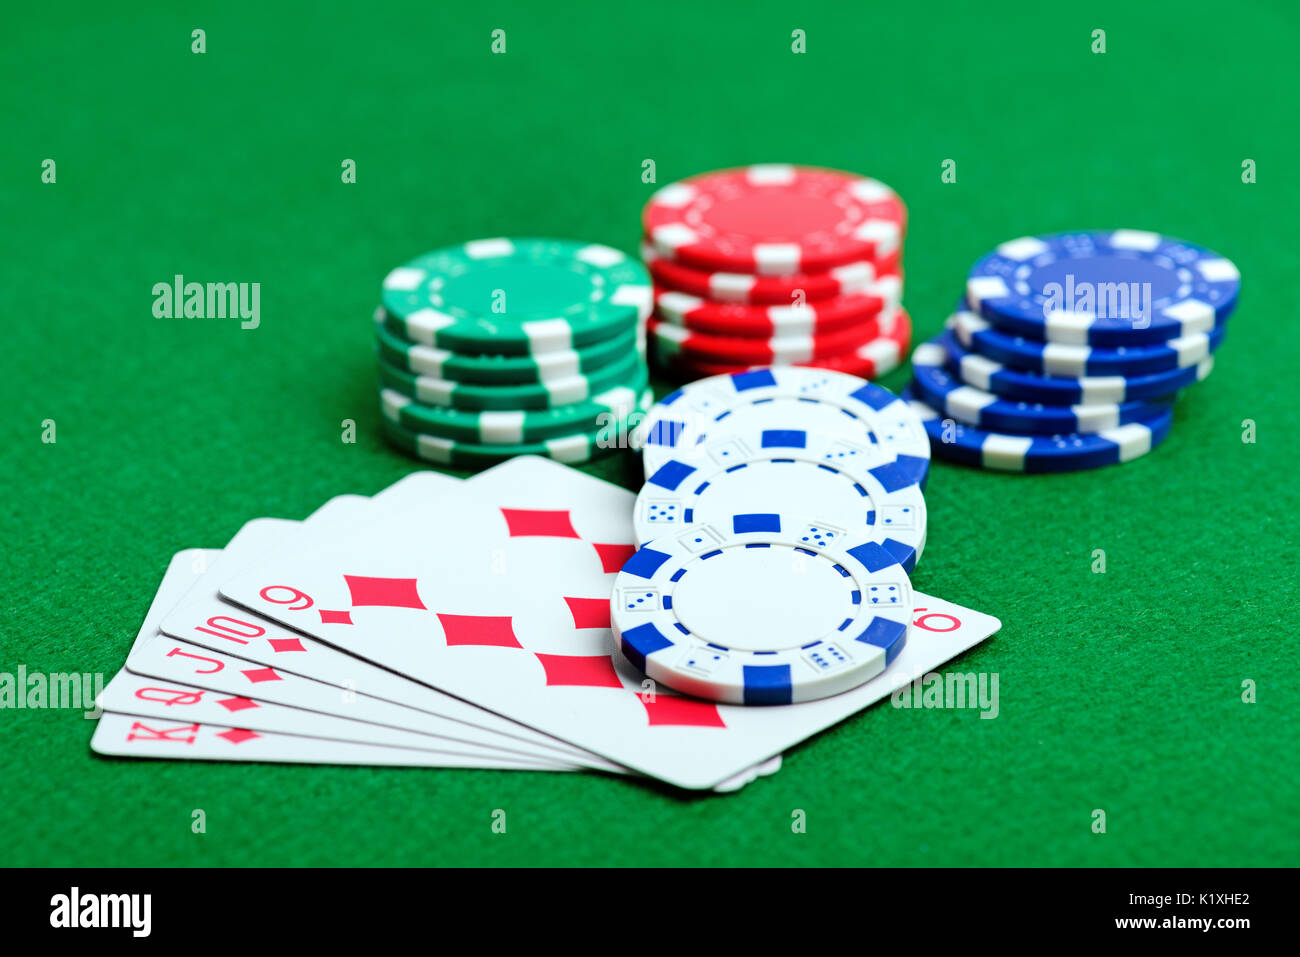 Casino green table with chips and royal flush of playing cards. Poker game concept Stock Photo